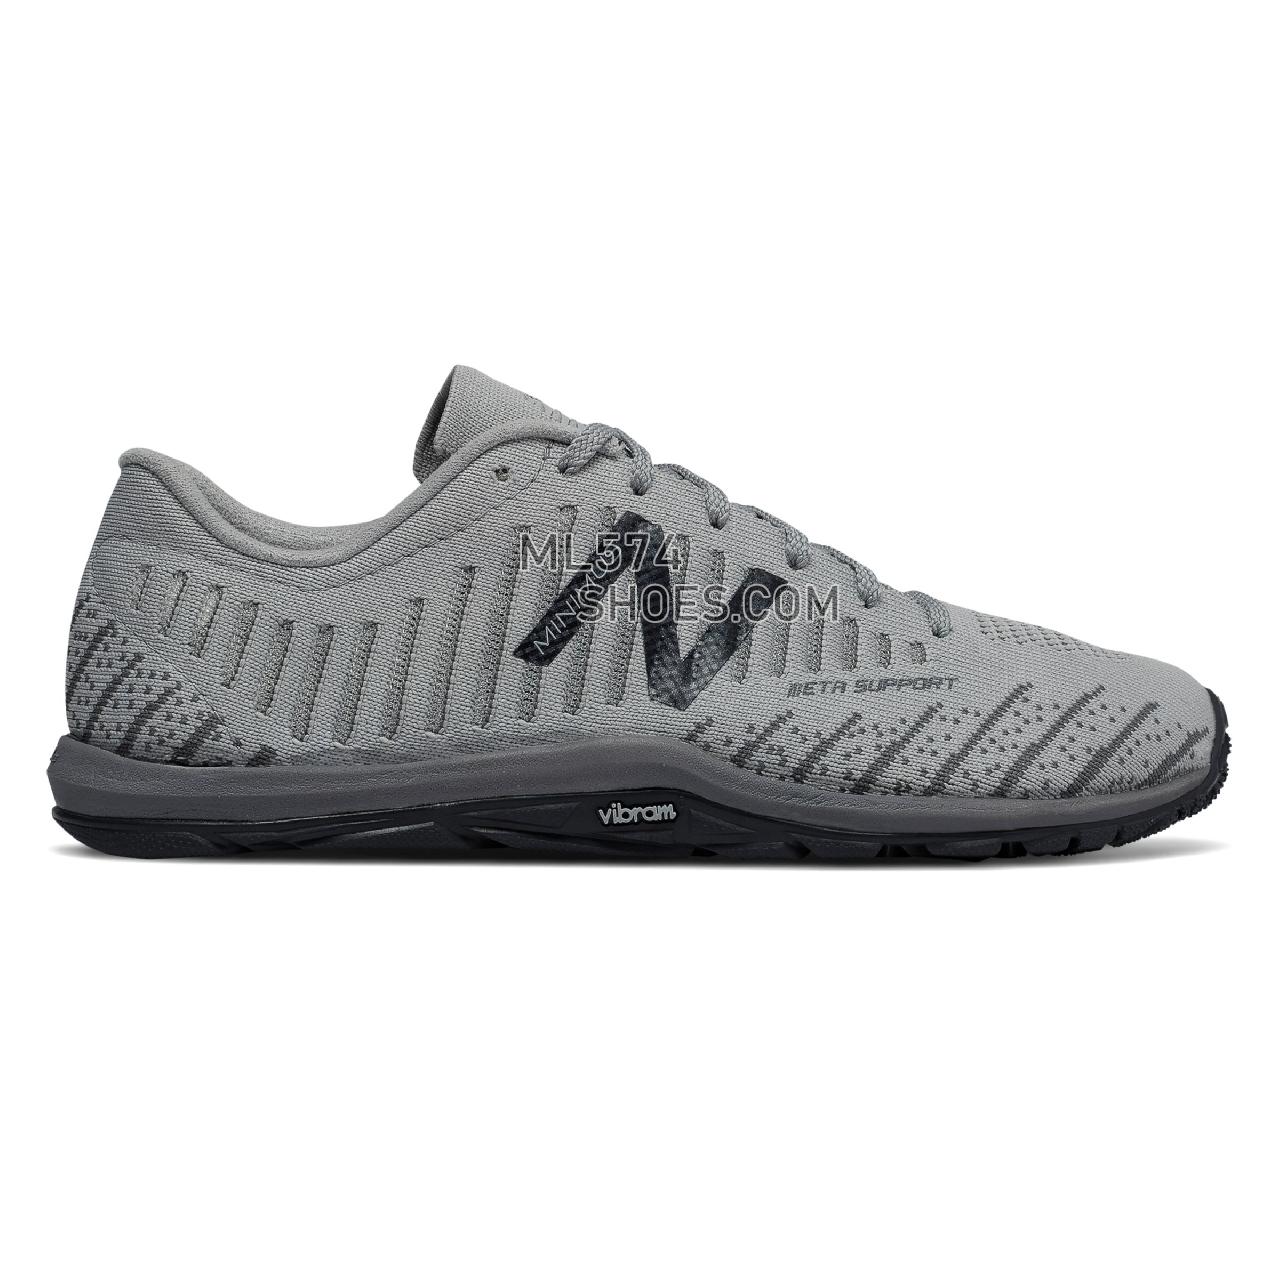 New Balance Minimus 20v7 Trainer - Women's 20 - X-training Silver with Gunmetal and Outerspace - WX20VA7